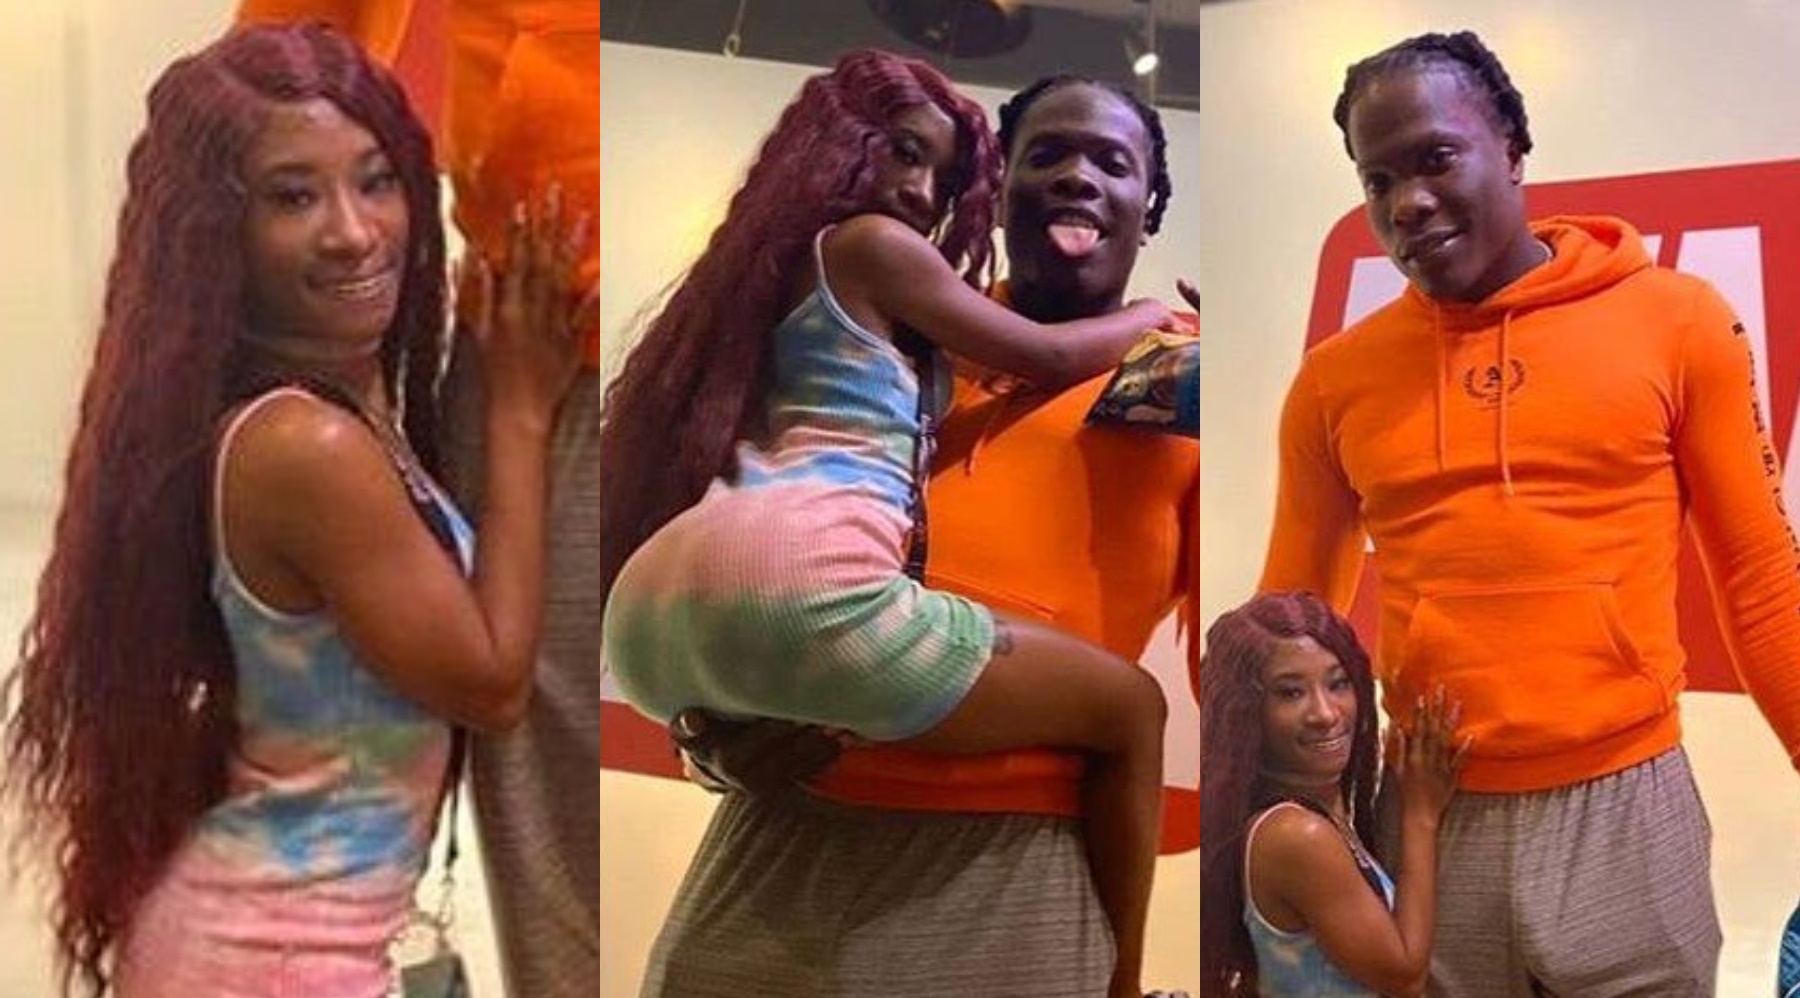 Photos of 'gigantic' man with huge manhood and pretty short lady cause serious stir online